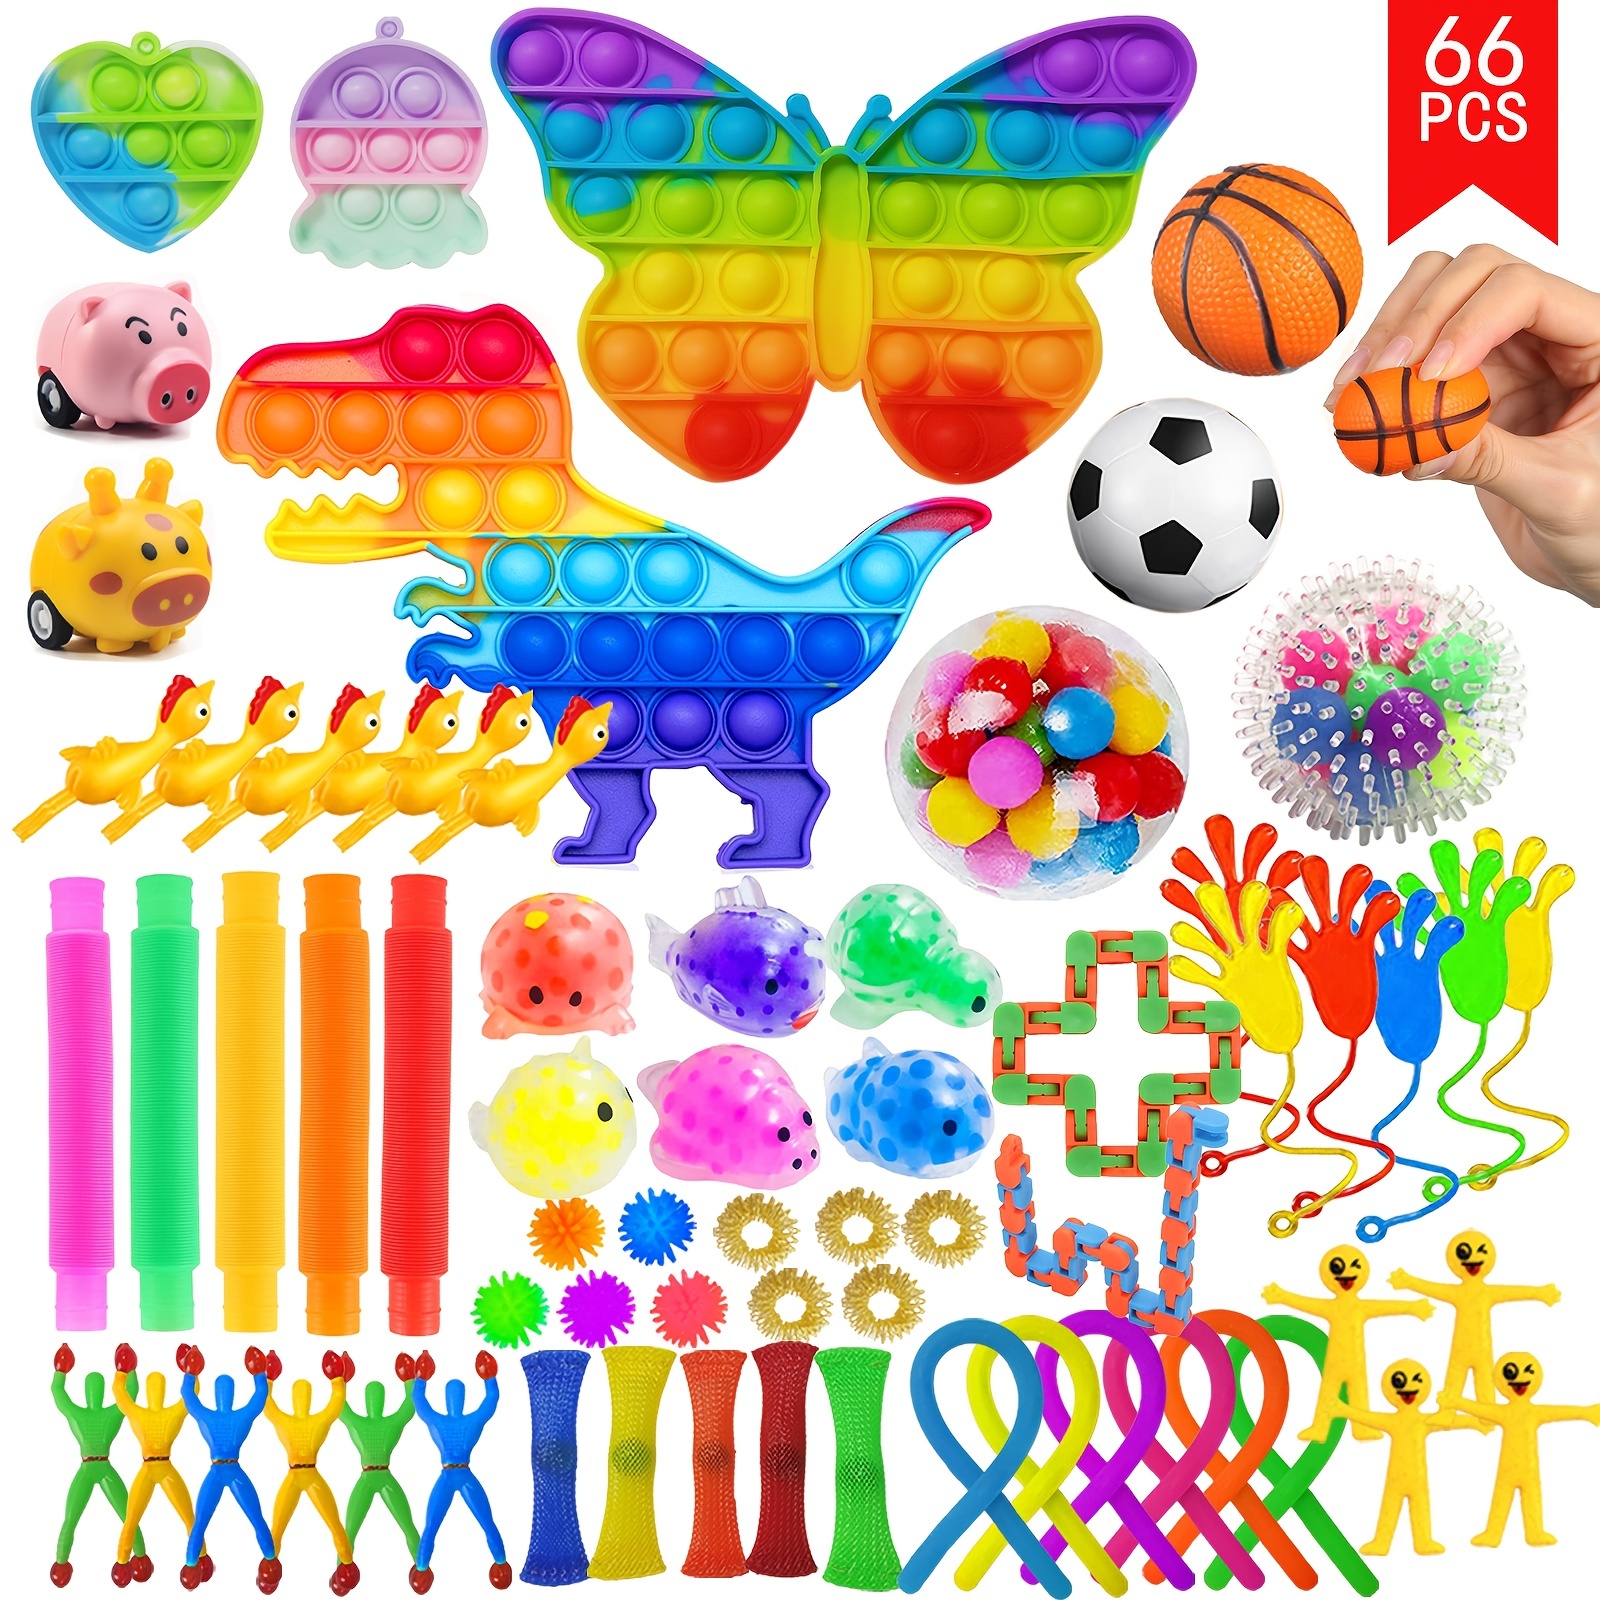 31 Pieces Halloween Toy Halloween Party Gift Gift Bag Filler Halloween Treats Prize, Push Pop Bubble Toys Stress Relief Anti-Anxiety Toys,blind Box